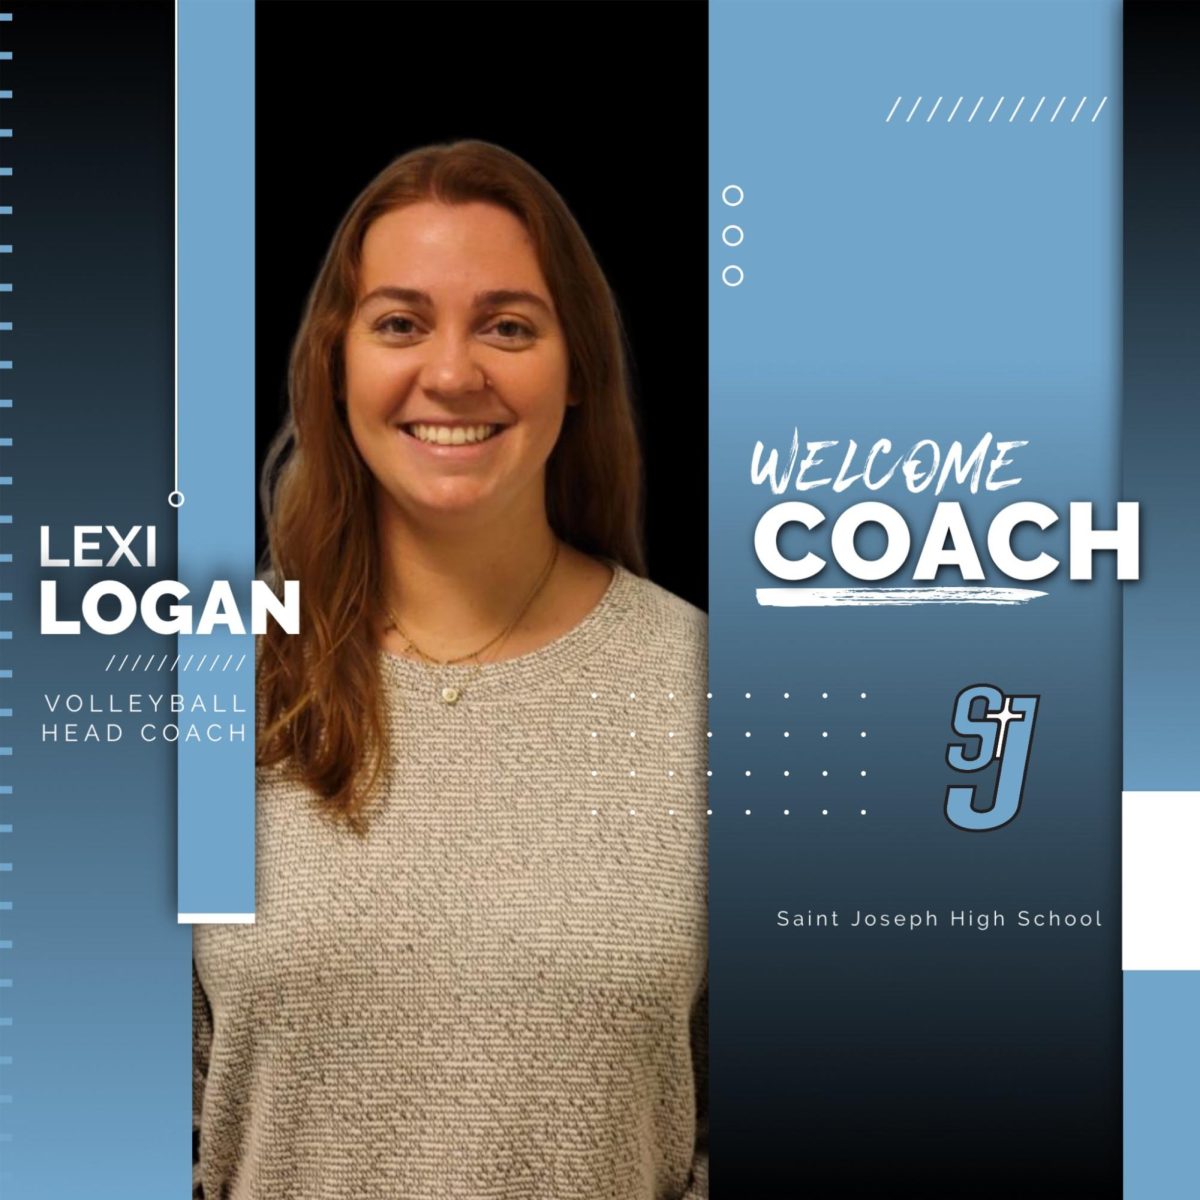 Lets+get+to+know+Coach+Lexi%2C+the+new+head+volleyball+coach%21